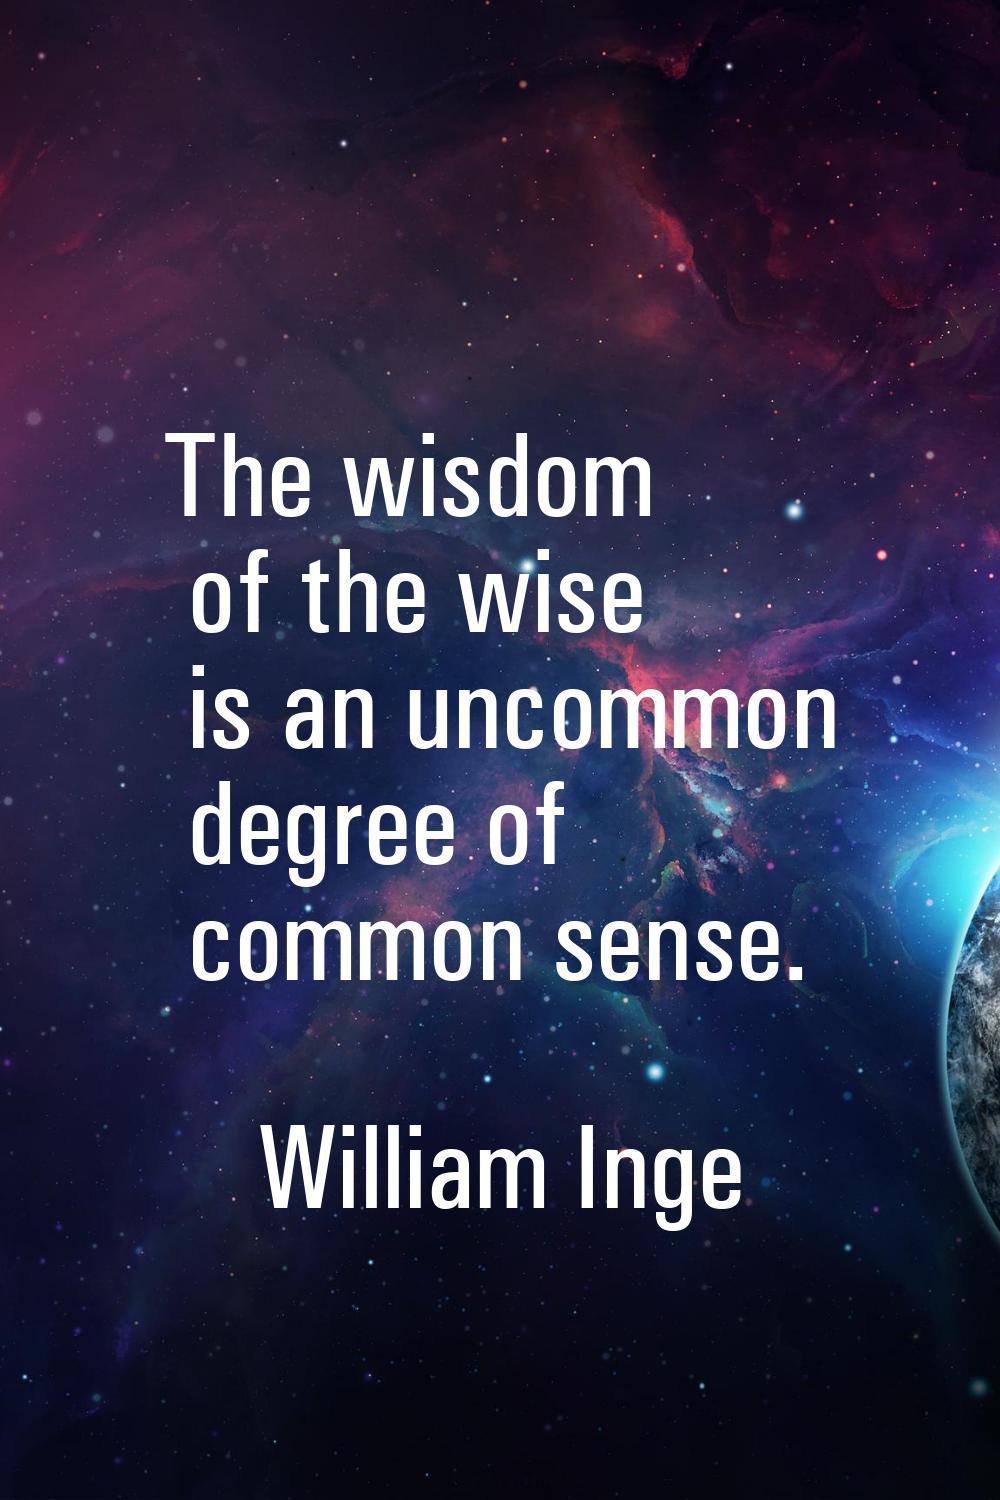 The wisdom of the wise is an uncommon degree of common sense.